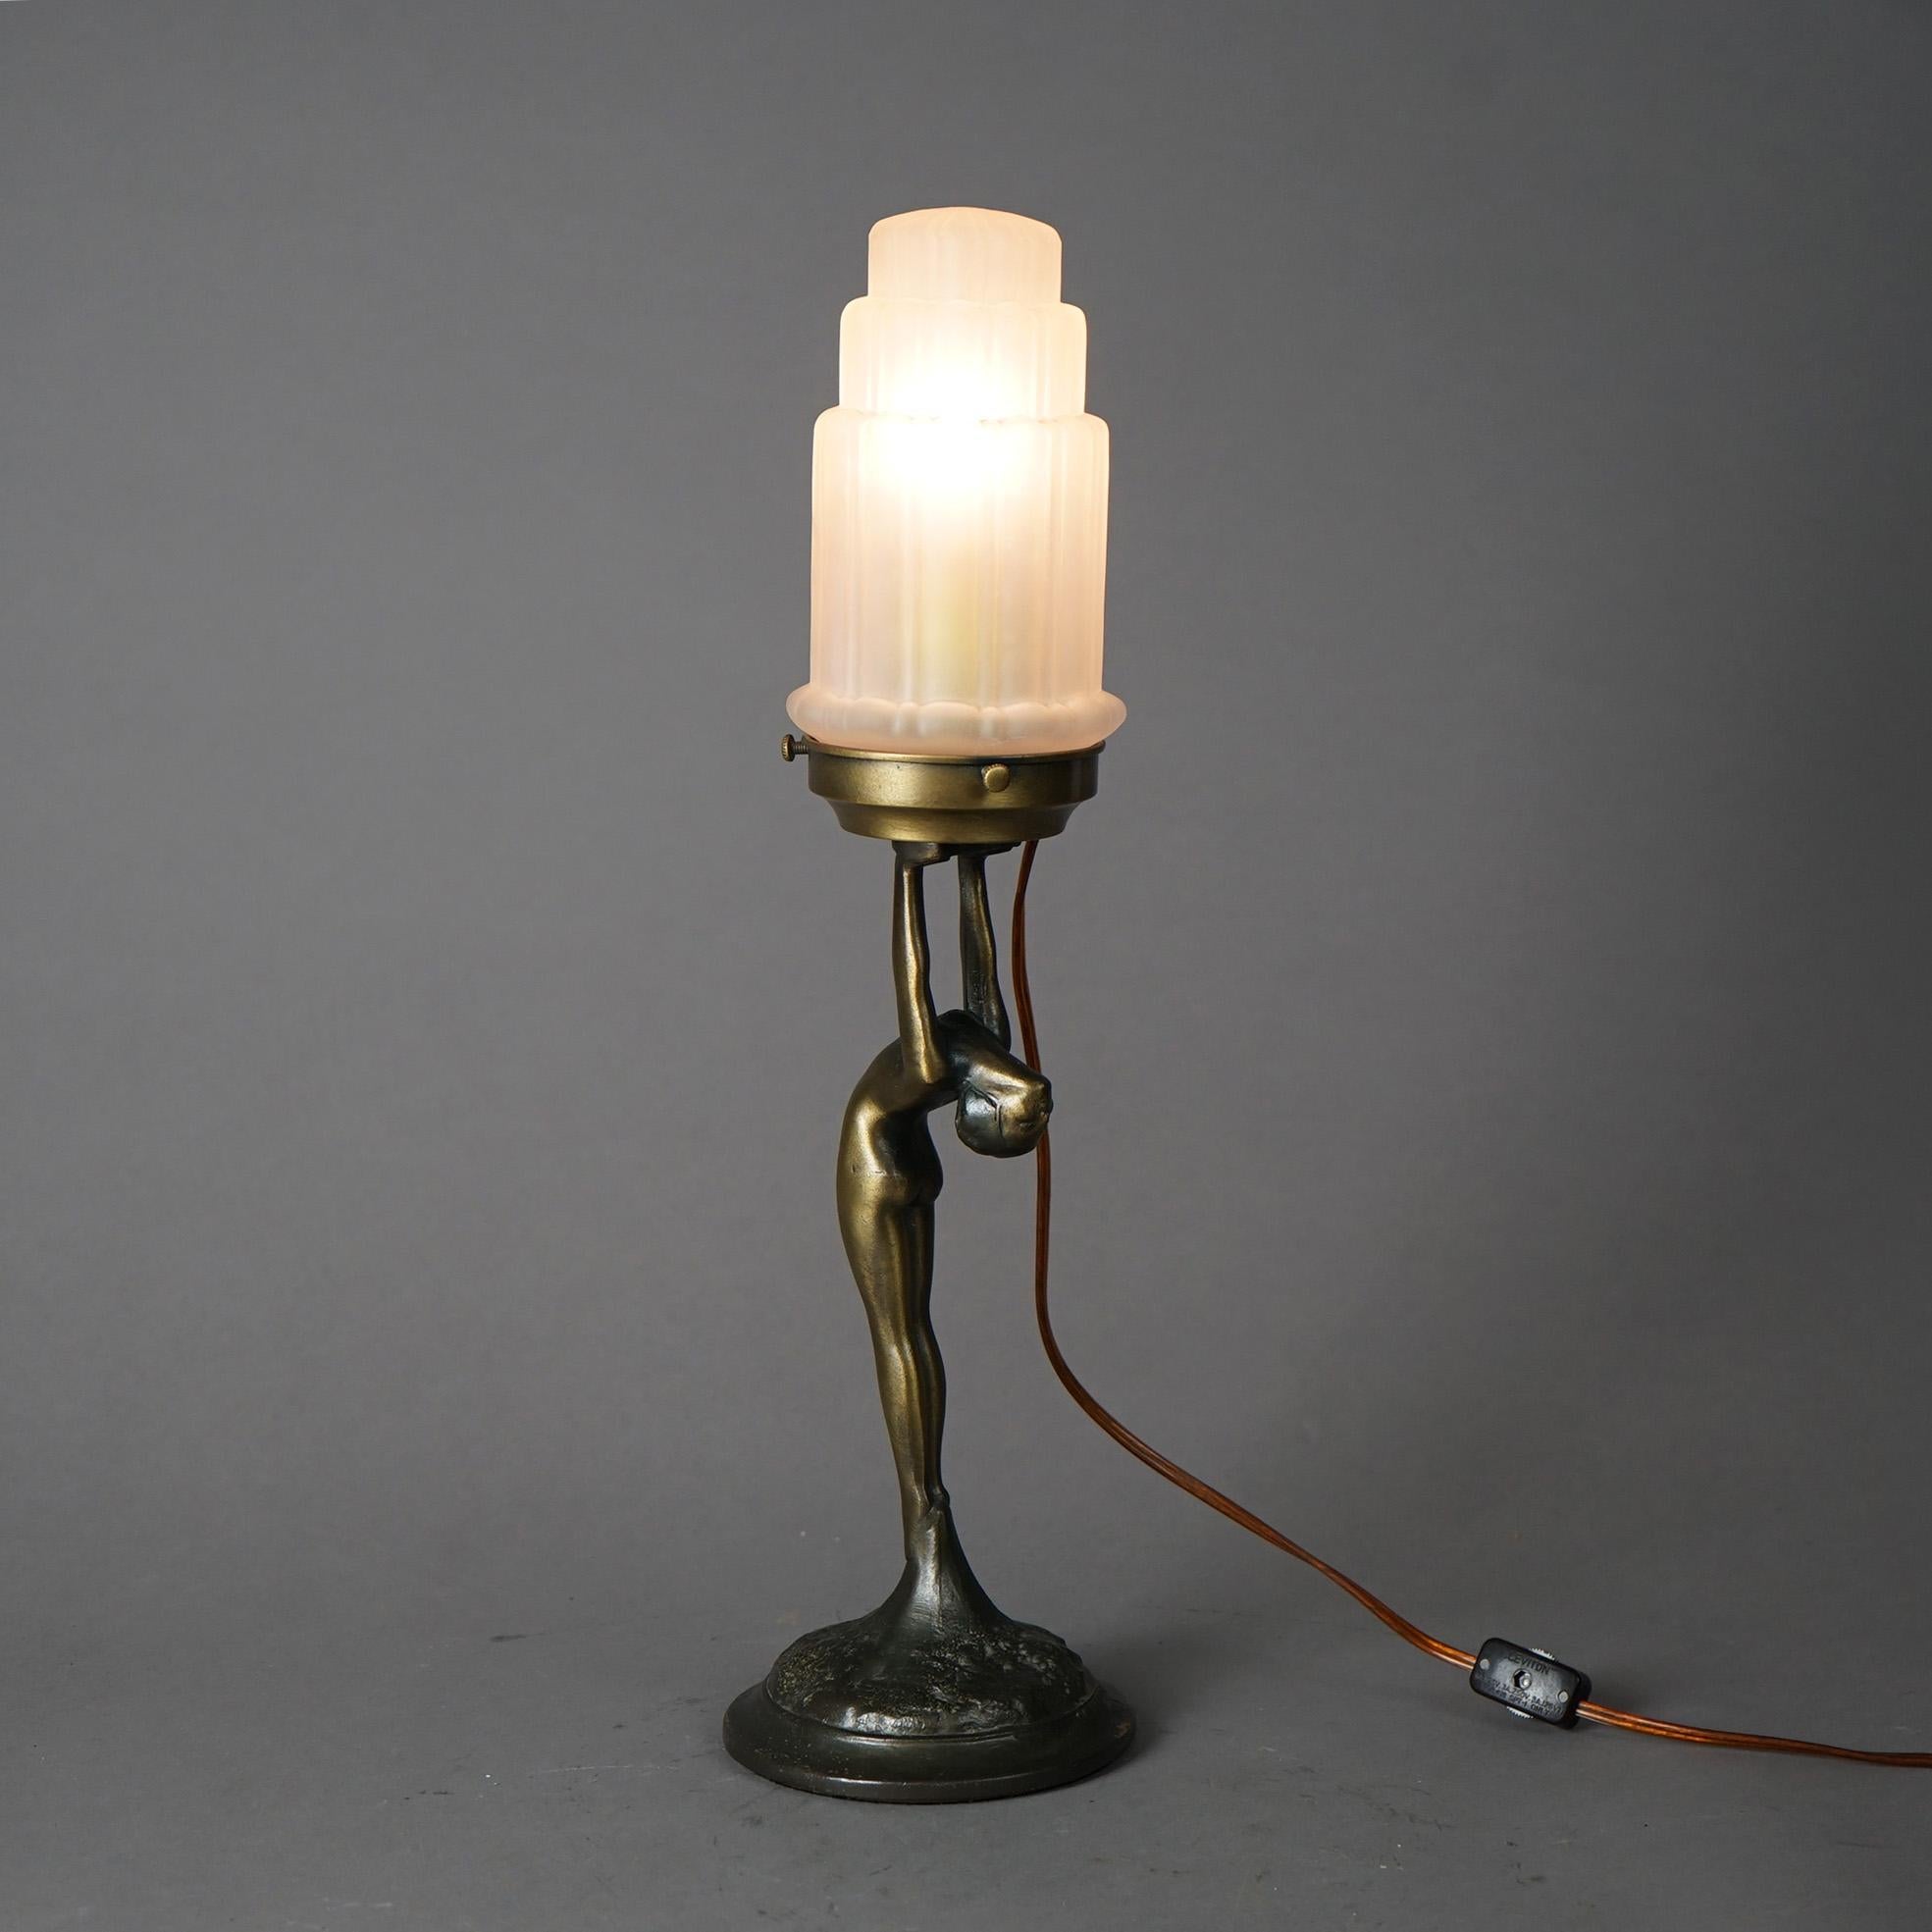 An antique Art Deco sculptural table lamp in the manner of Frankart offers cast metal base with standing figural nude of a woman raising an architectural form globe, early 20th century

Measures - 18